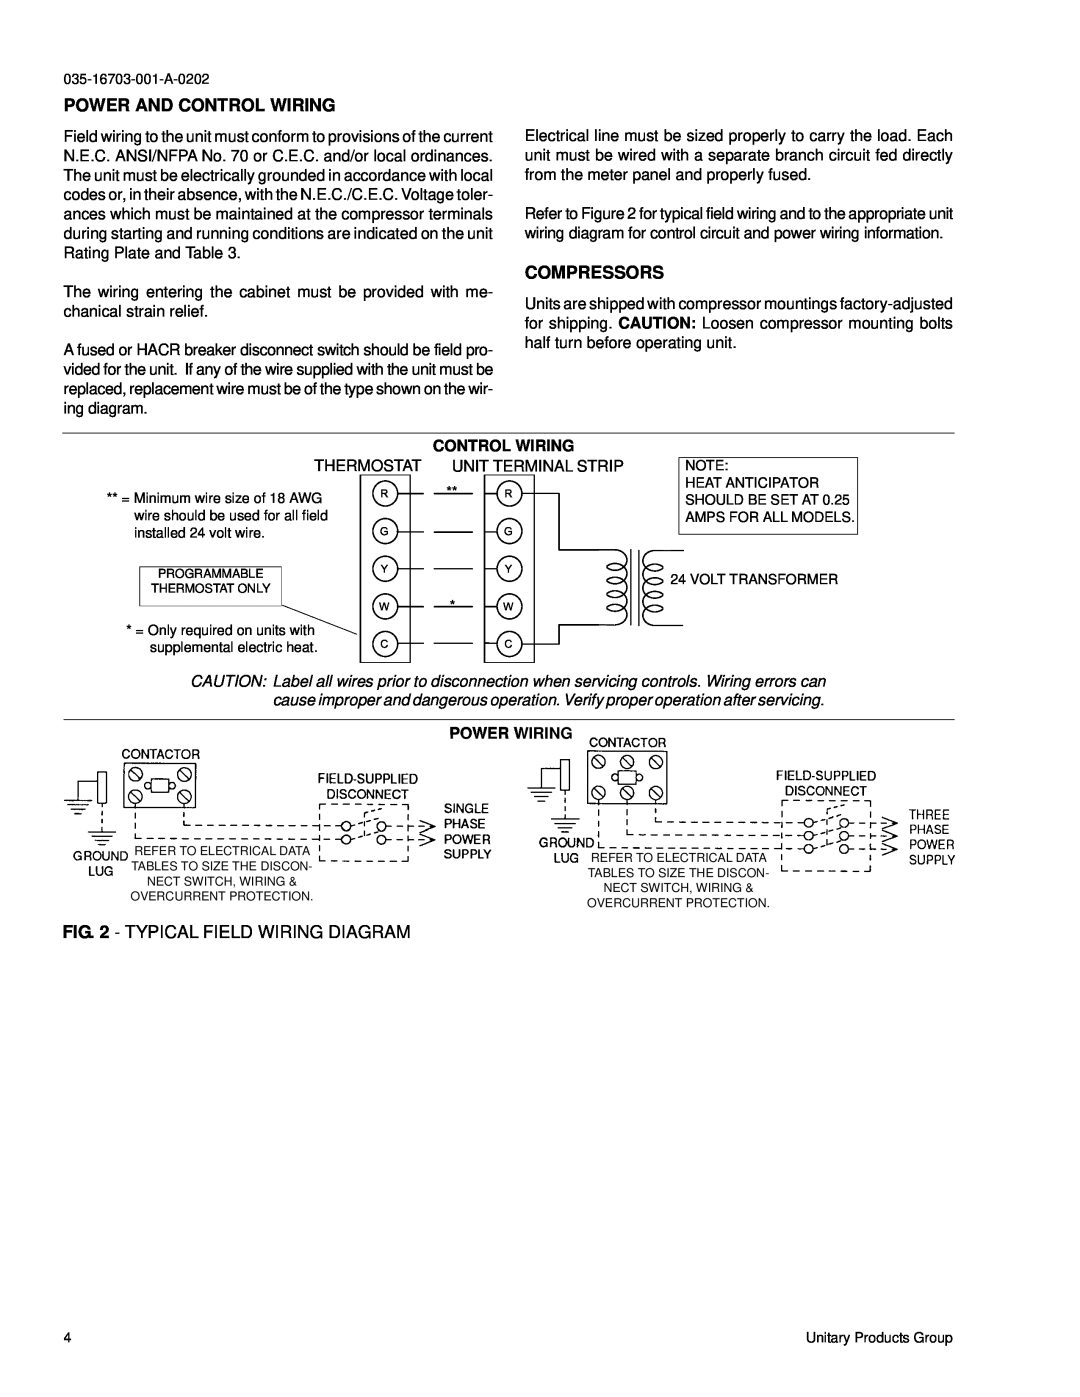 York D1EB018 THRU 060 Power And Control Wiring, Compressors, Typical Field Wiring Diagram, Power Wiring 